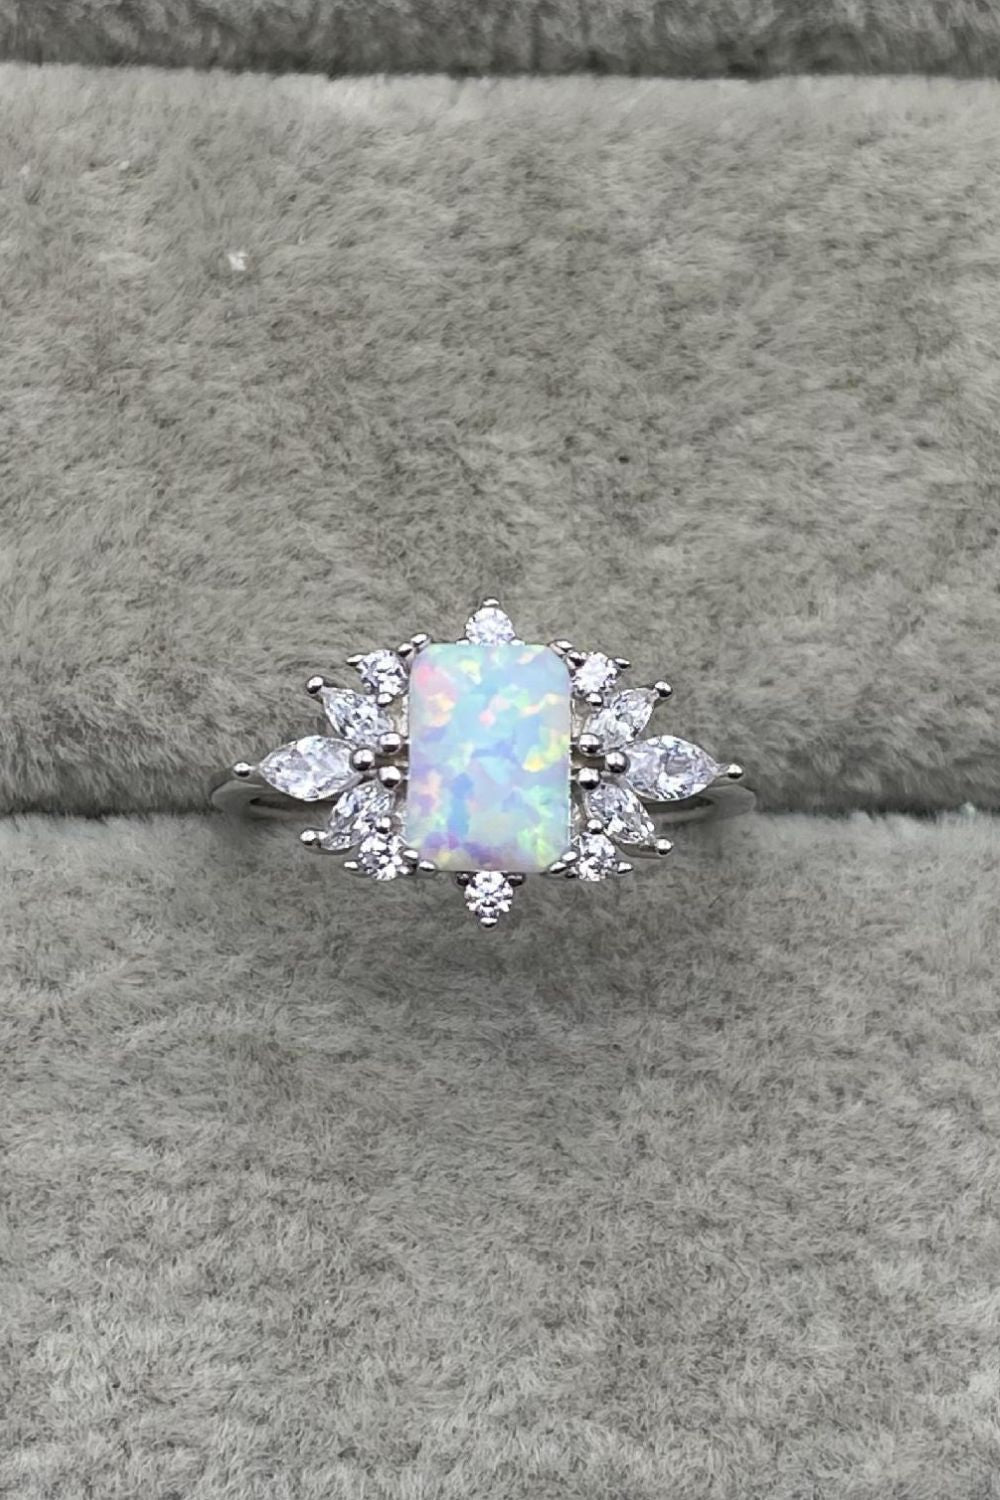 925 Sterling Silver Zircon and Opal Ring - Tophatter Shopping Deals - Electronics, Jewelry, Auction, App, Bidding, Gadgets, Fashion